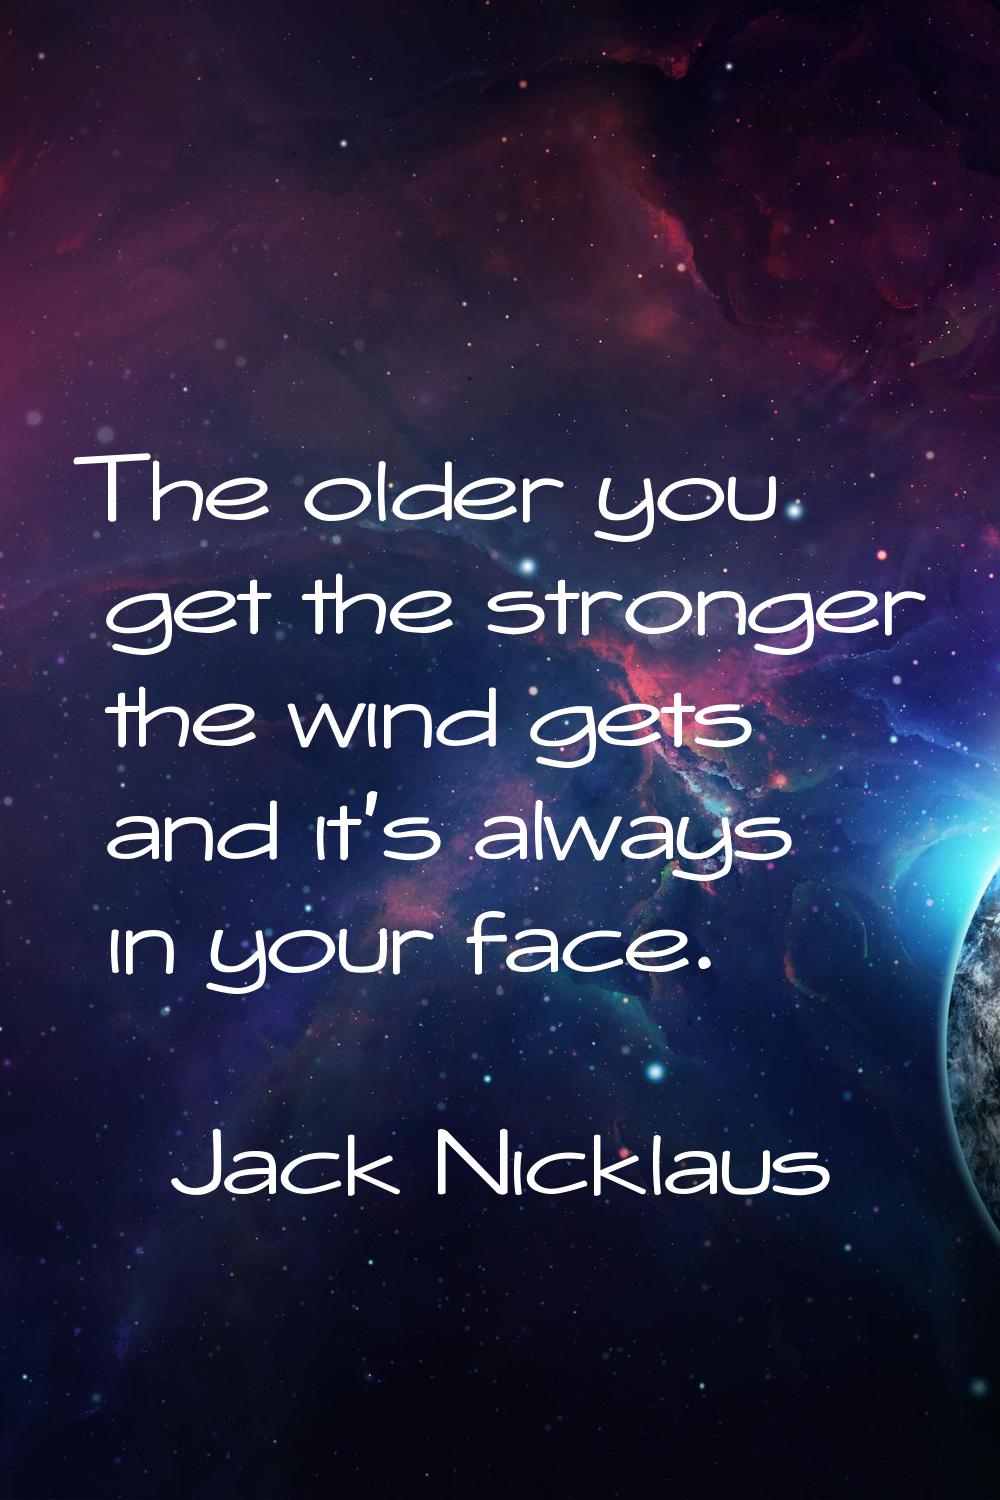 The older you get the stronger the wind gets and it's always in your face.